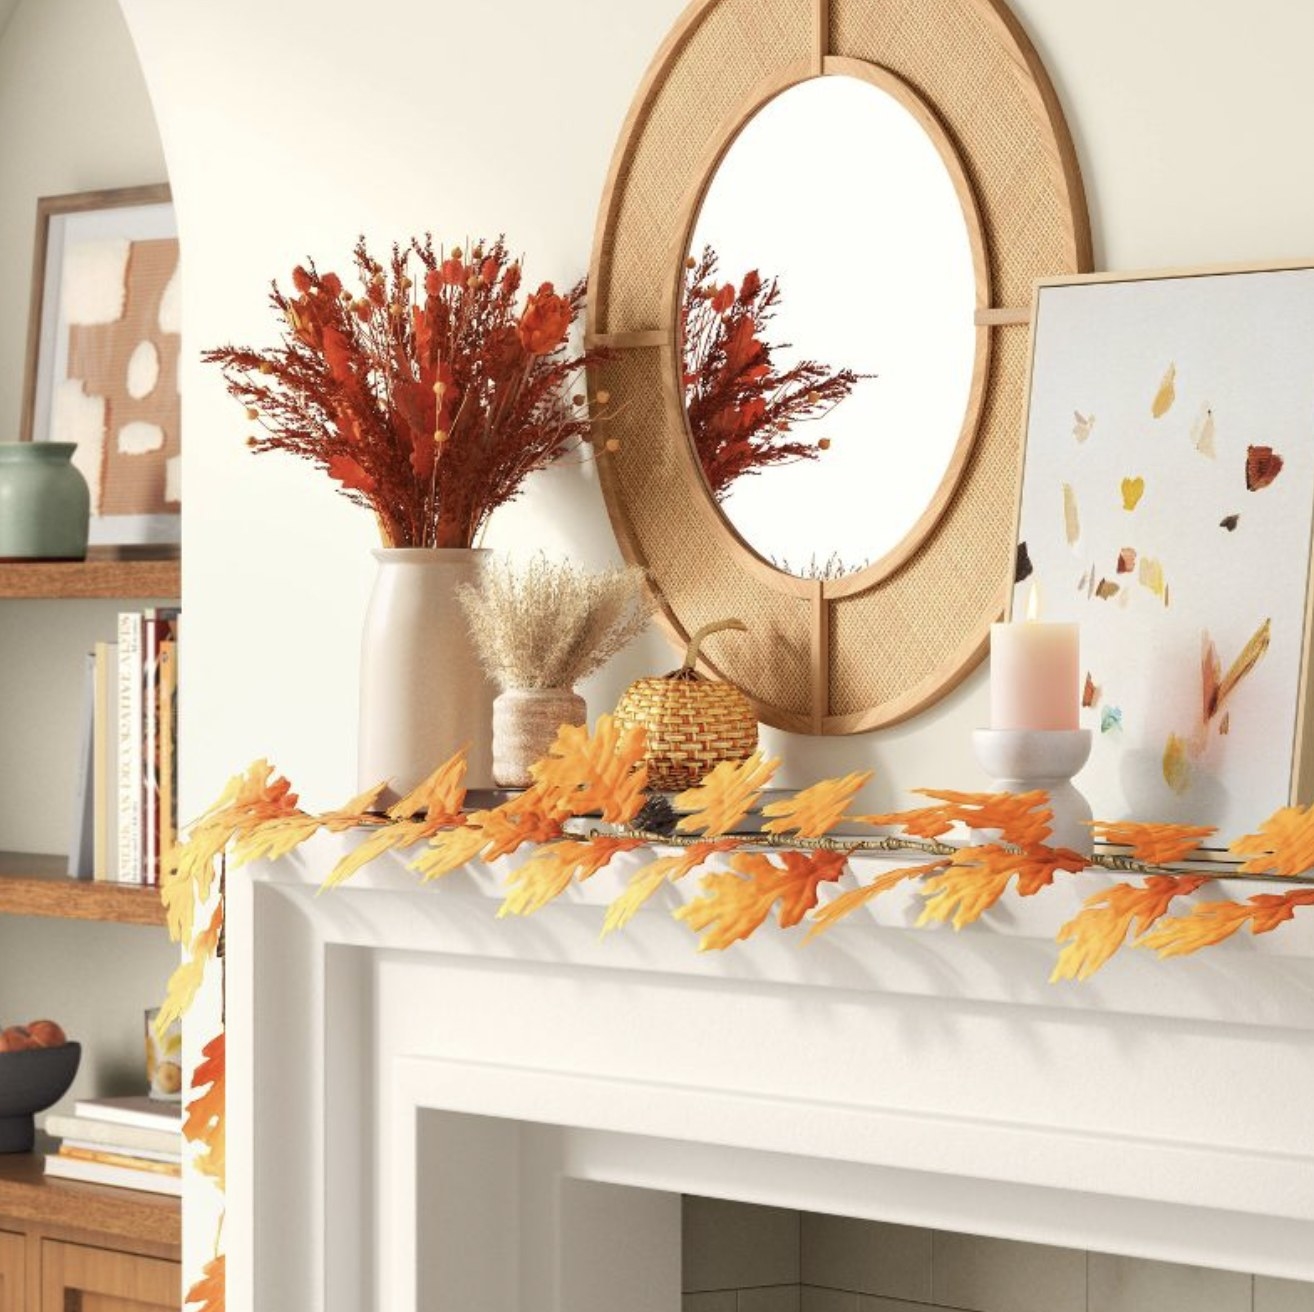 The orange and yellow artificial leaves garland on mantlepiece